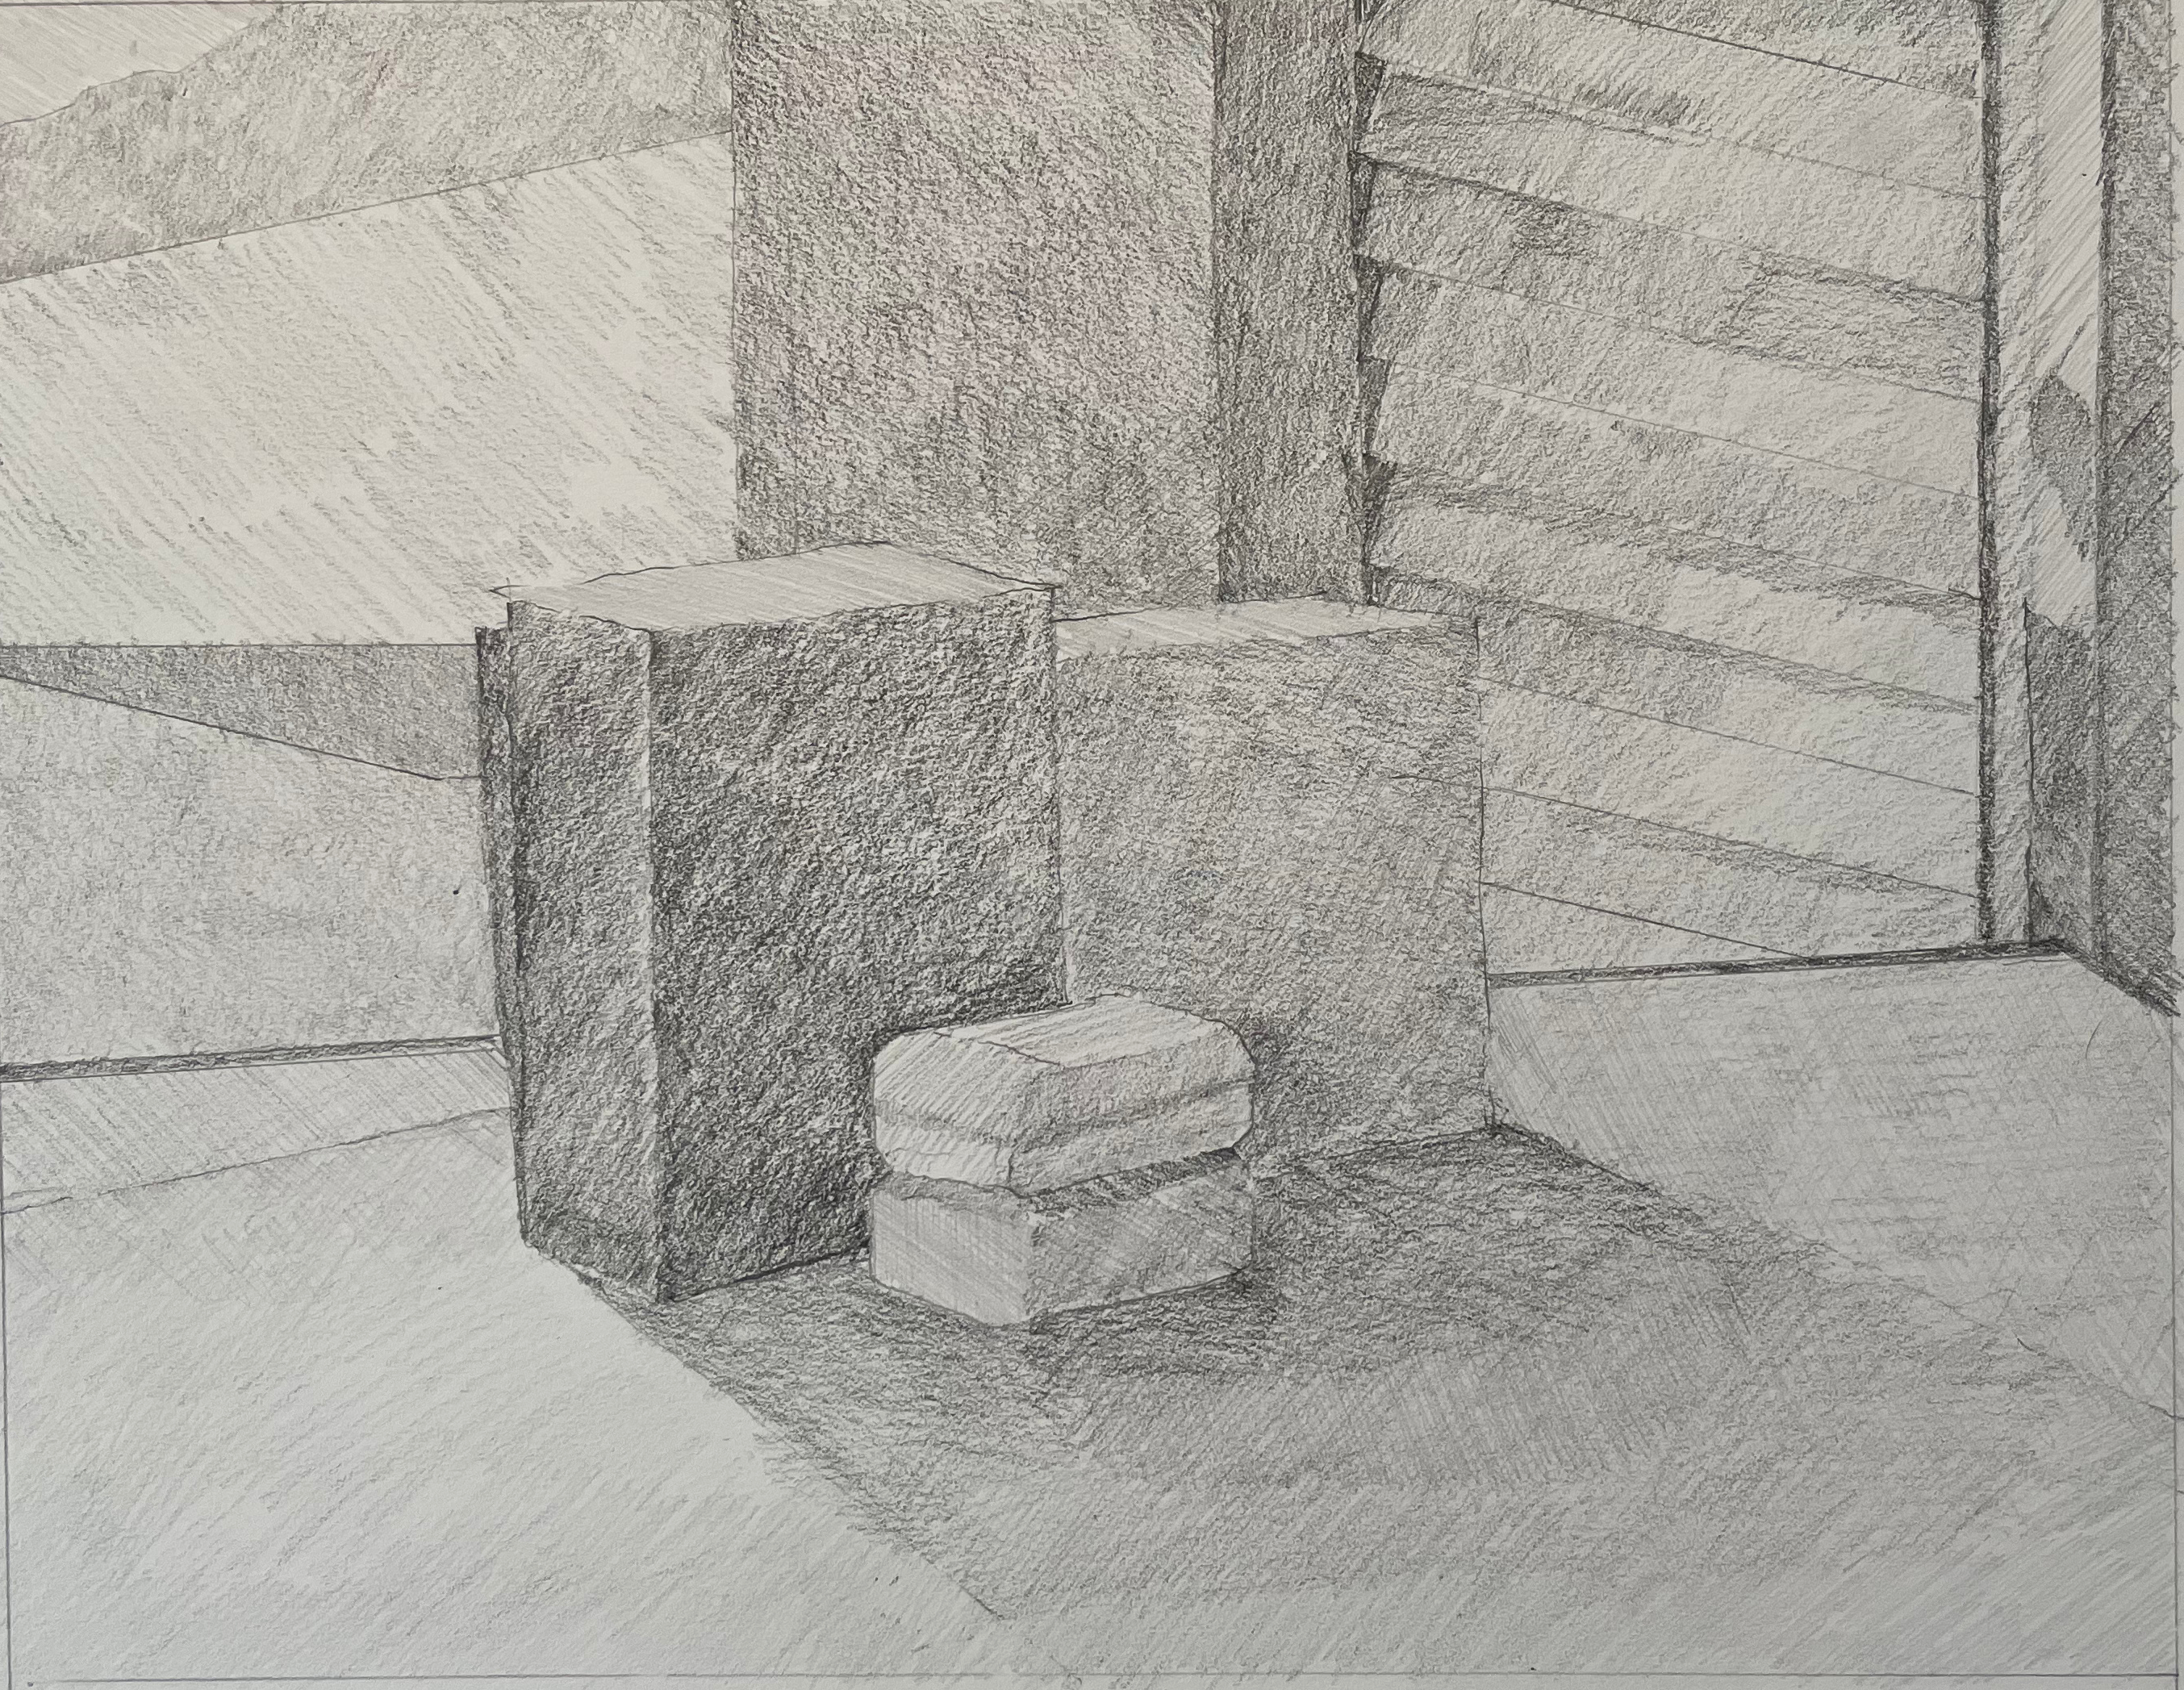 Drawing II - Full Value Scale